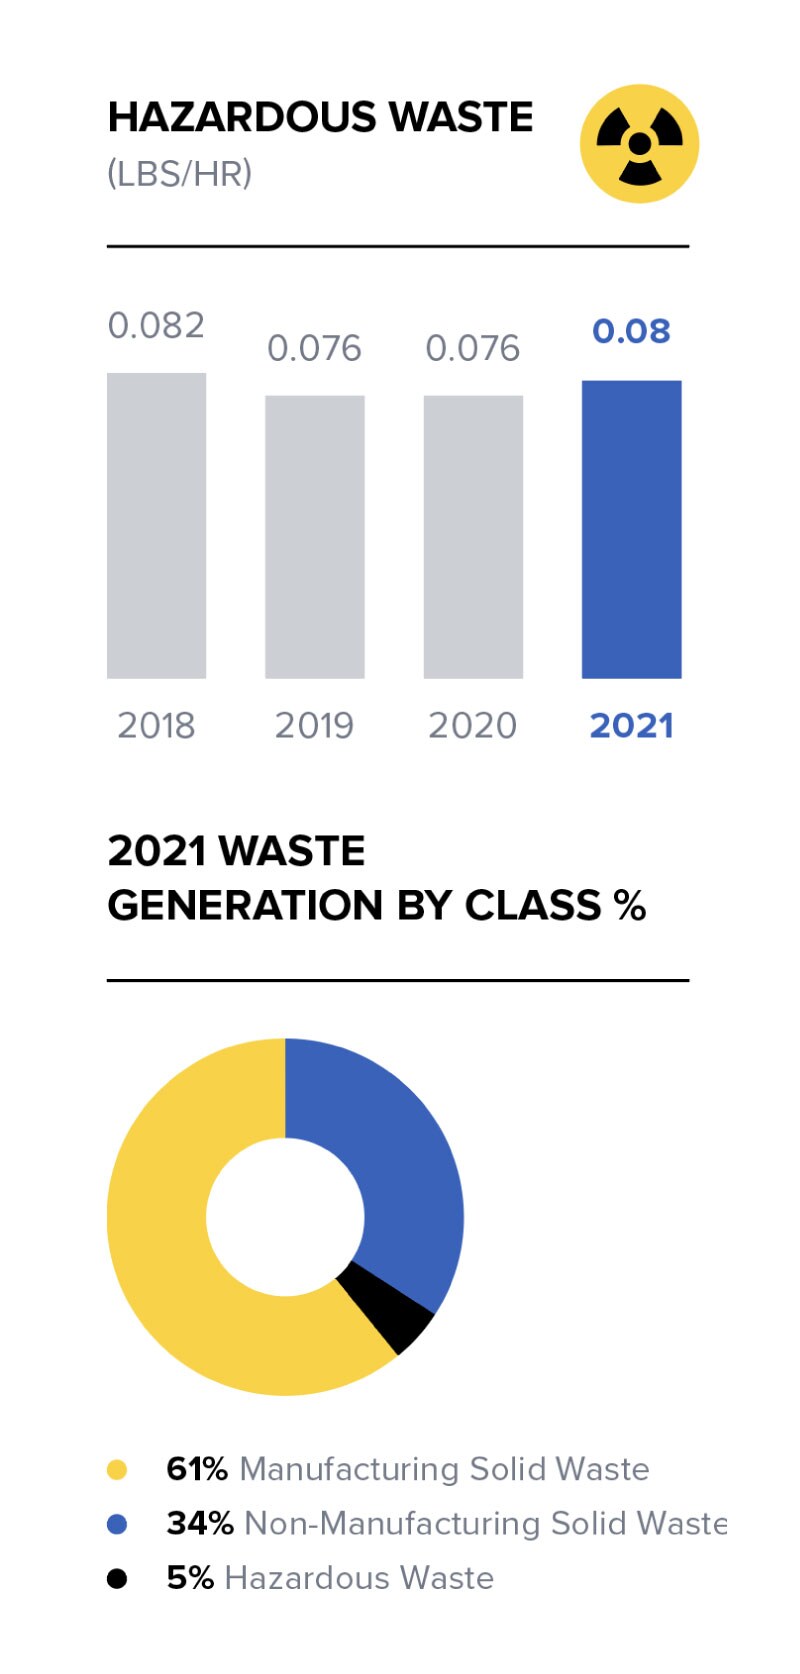 Graph of hazardous waste and 2021 waste generation by class percentage